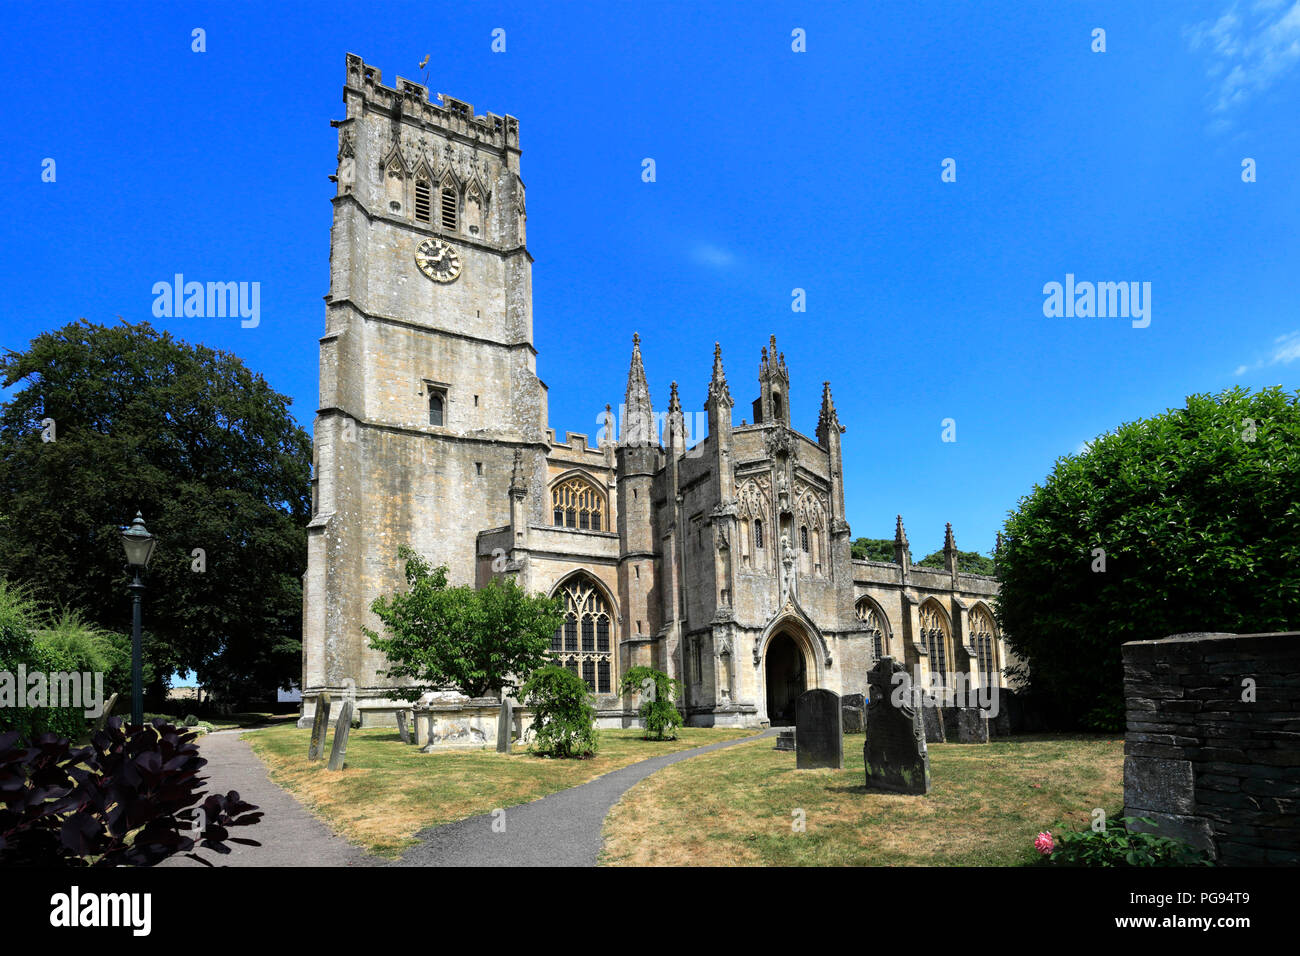 St Peter St Pauls chiesa, Northleach town, Gloucestershire, Cotswolds, Inghilterra Foto Stock